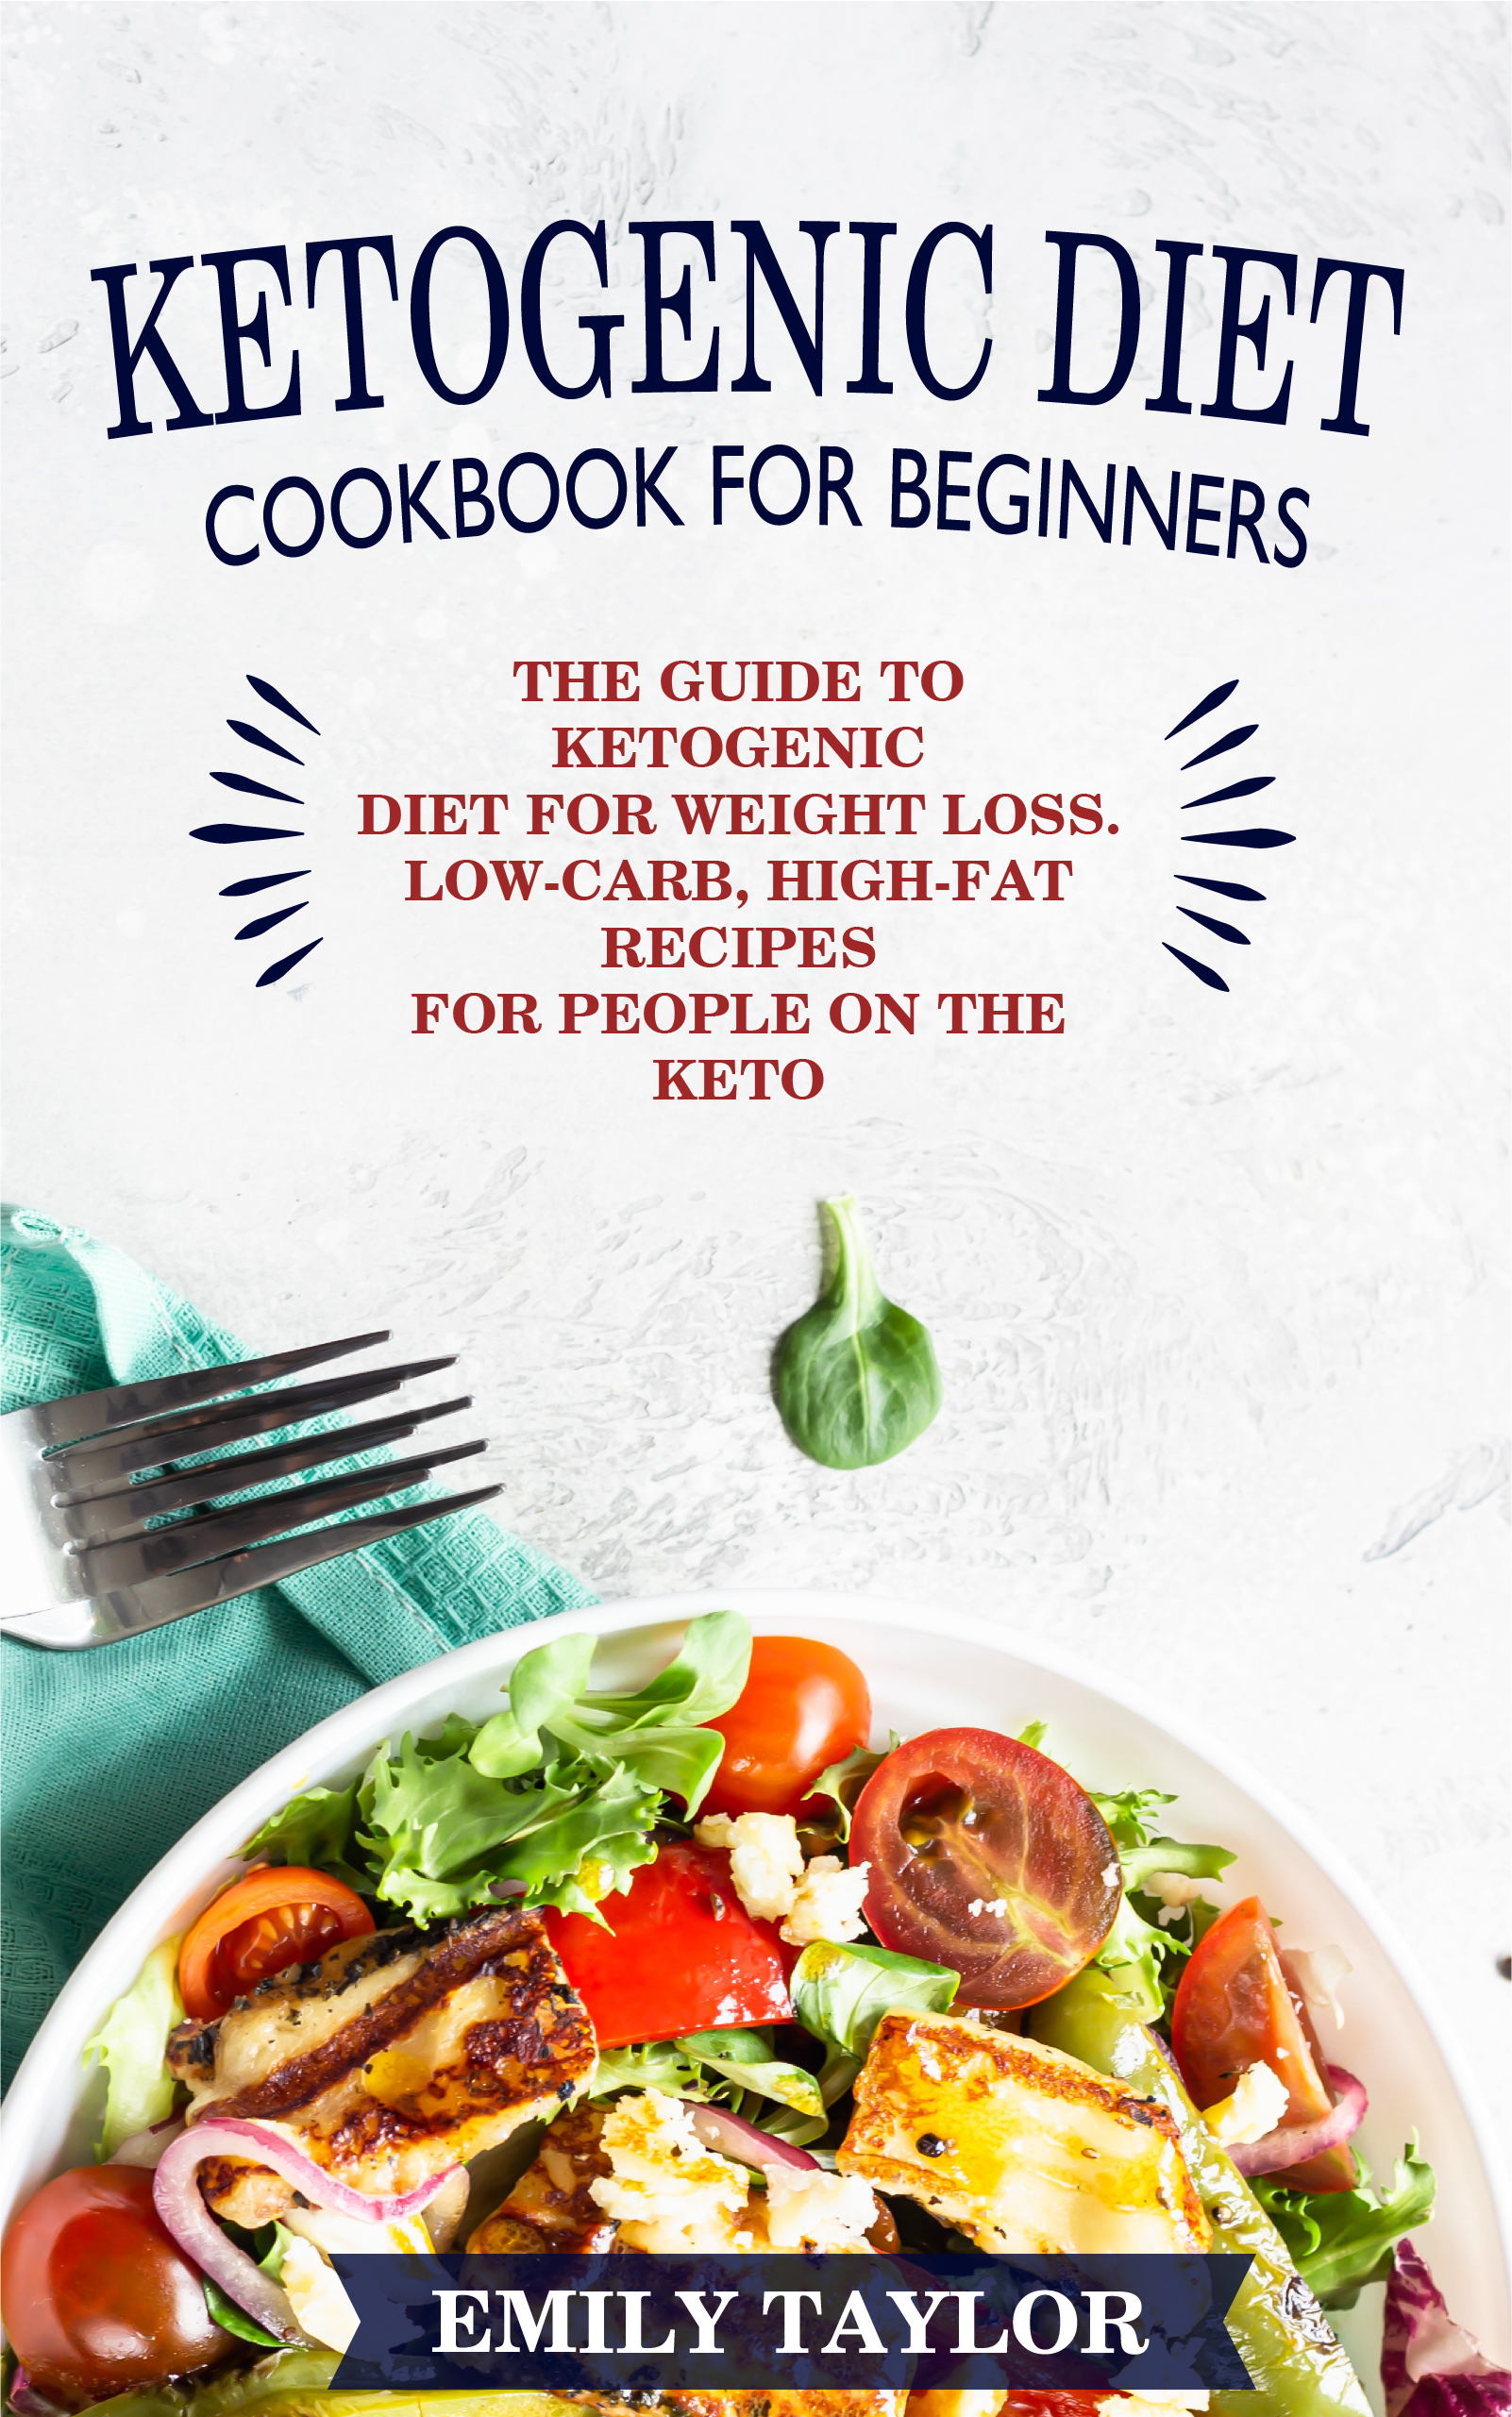 FREE: Ketogenic Diet Cookbook for Beginners: The Guide to Ketogenic Diet for Weight Loss. Low-Carb, High-Fat Recipes for People on the Keto Diet by Emily Taylor